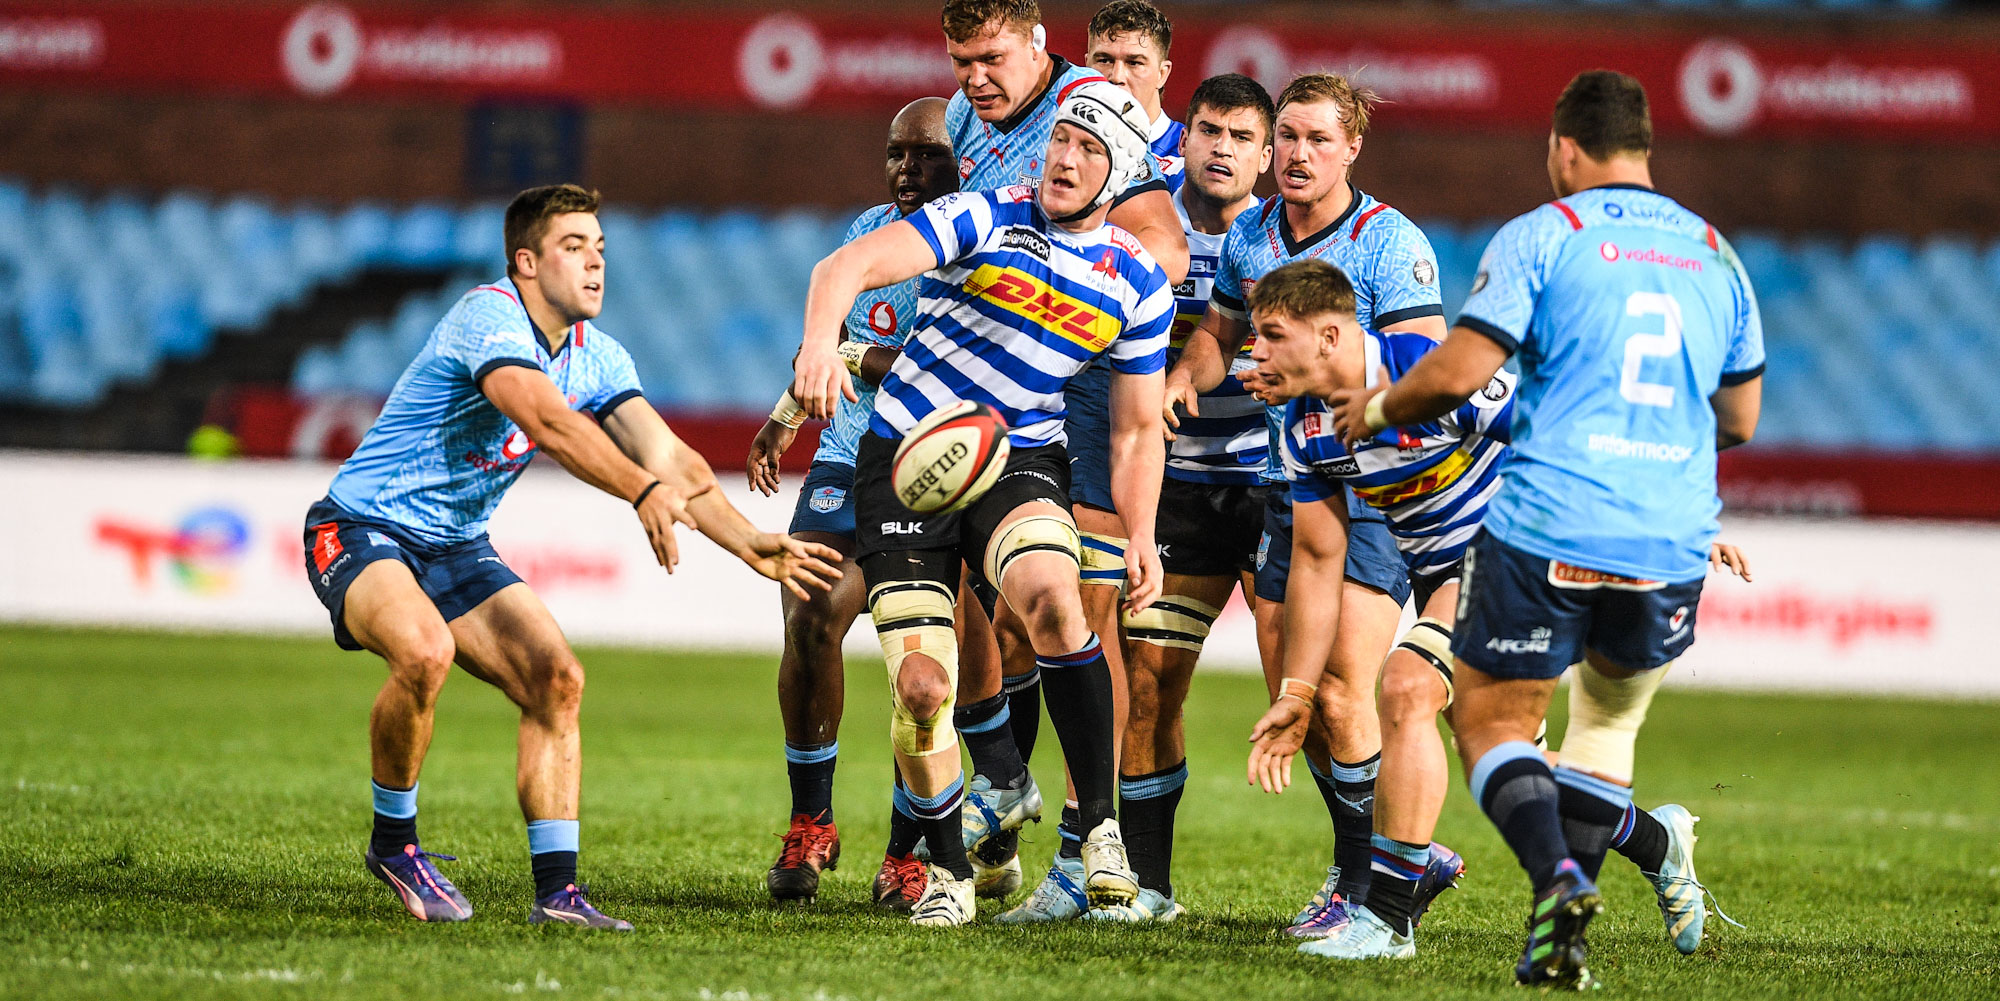 Zak Burger gets the ball away under pressure from DHL WP.